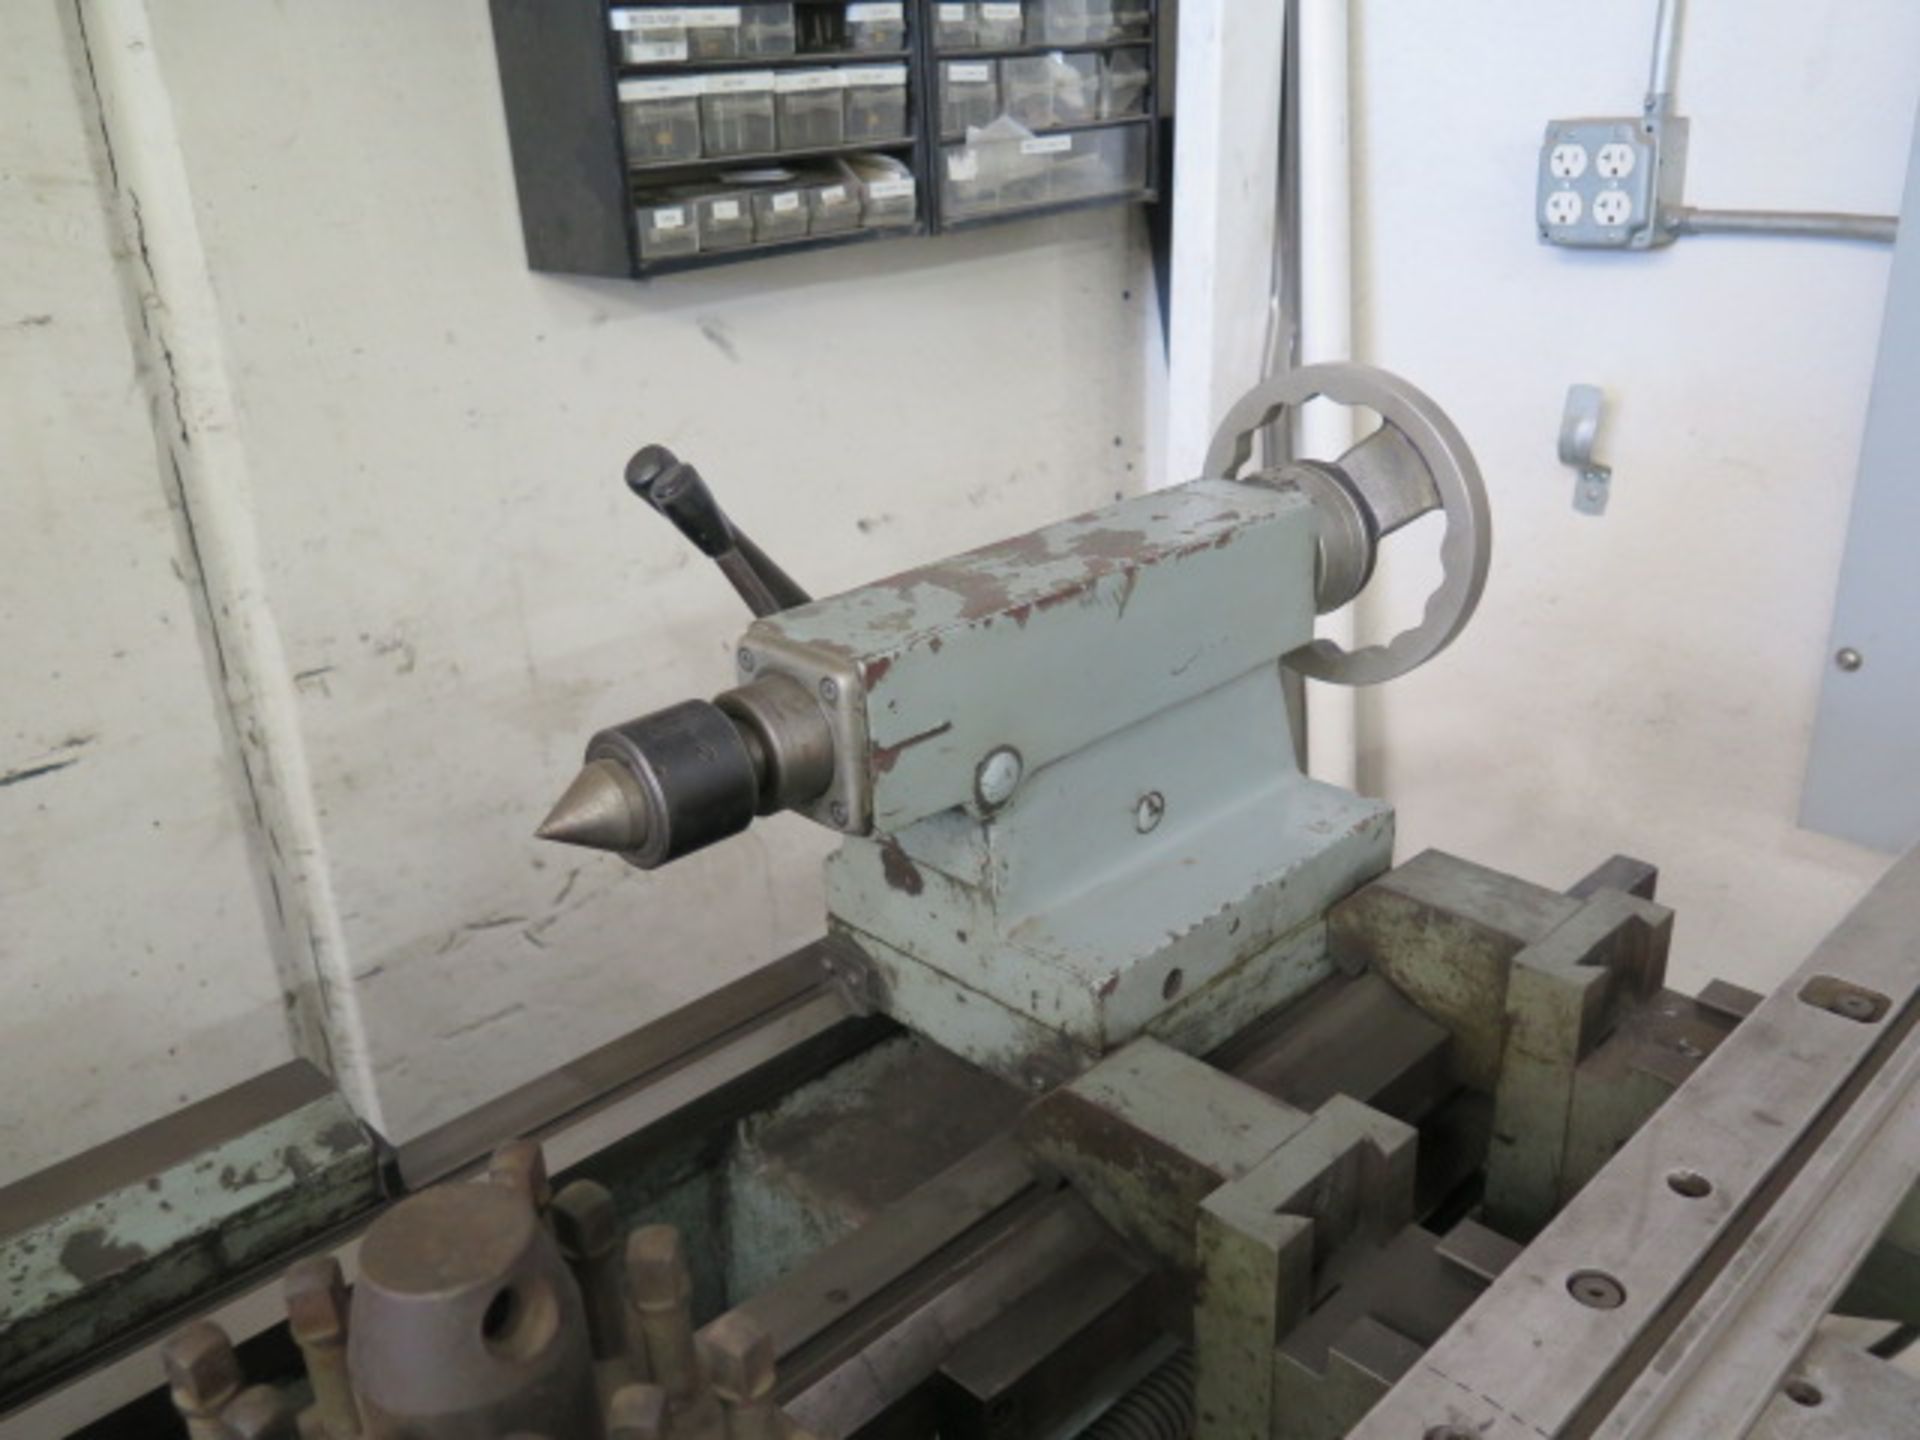 SW Shenwai “Chieftain” 15” x 40” Geared Head Gap Lathe s/n 10449 w/ 40-1800 RPM, Inch/mm, SOLD AS IS - Image 9 of 12